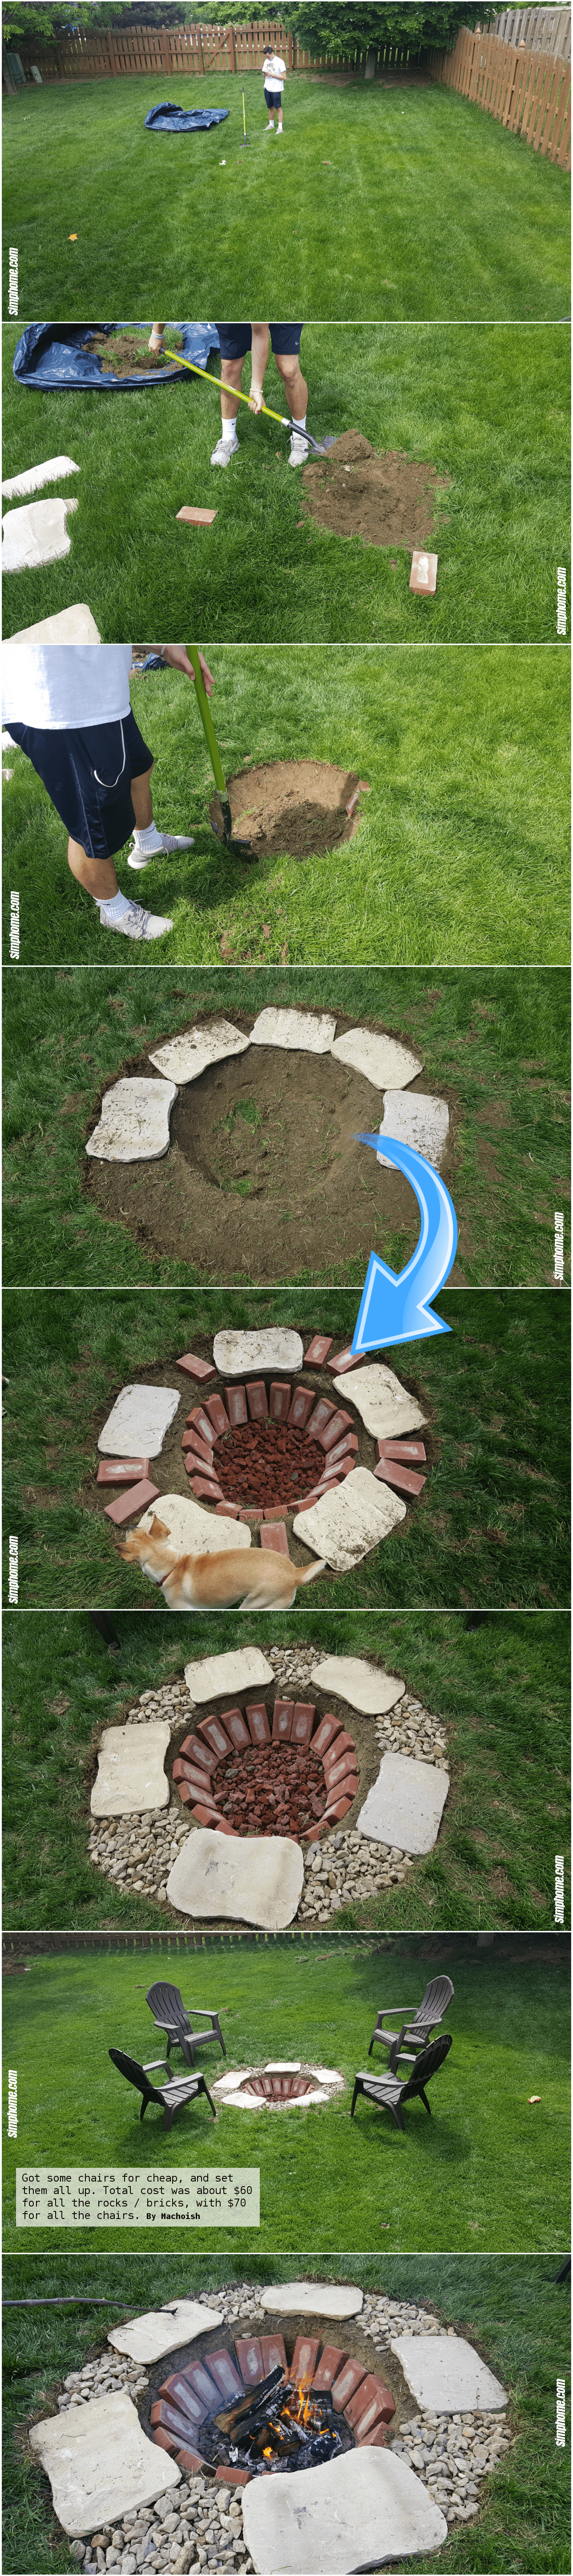 8.Easy In Ground Fire Pit on the Cheap By Simphome.com